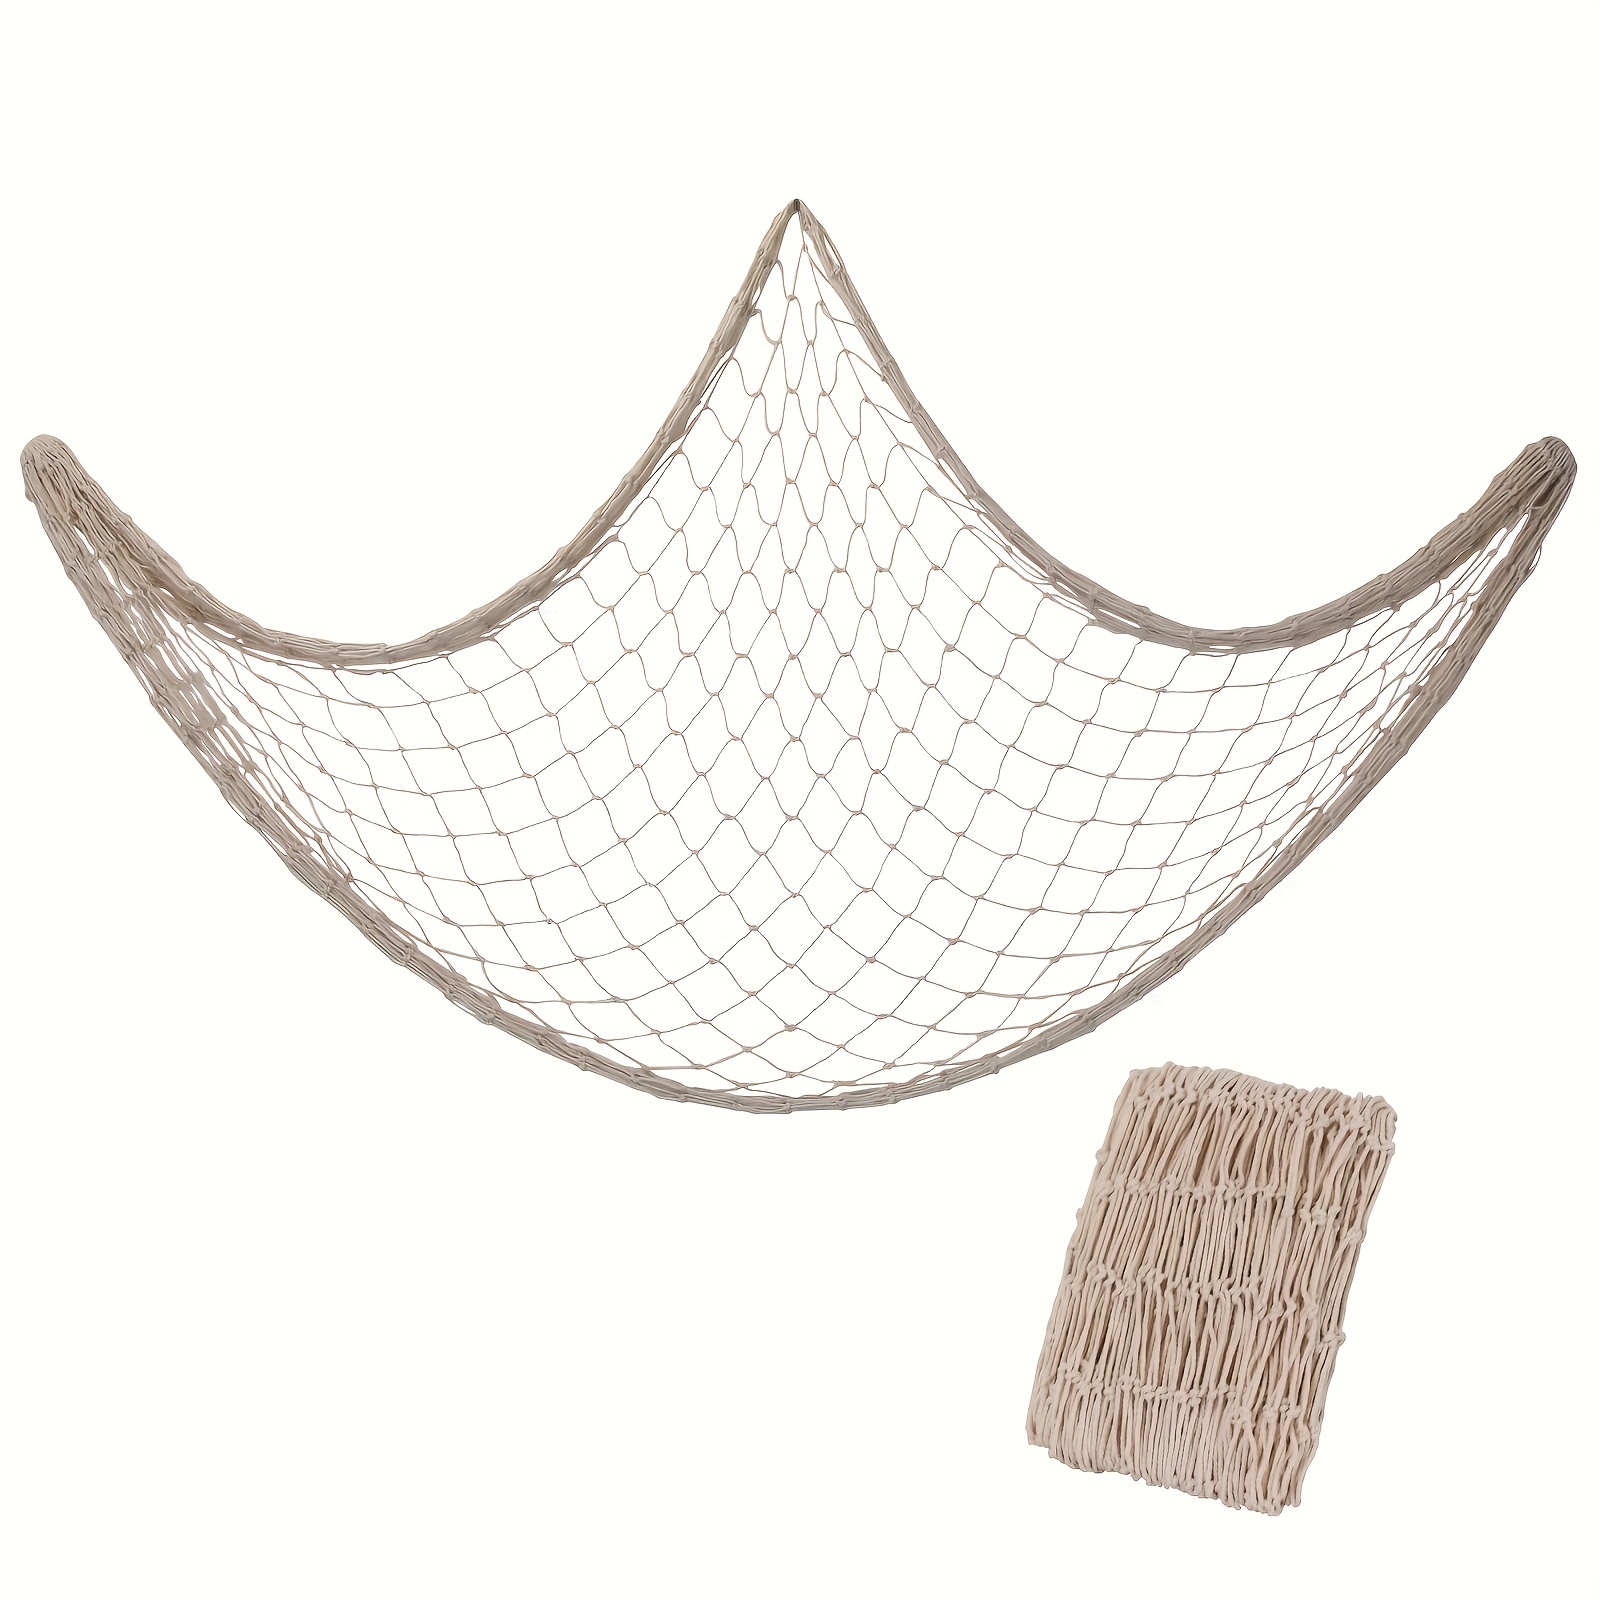  BESPORTBLE Bedroom Wall Fish Net Fishing Party Decorations  Nautical Mediterranean Wall Decor Fish Netting Decor Mediterranean Style  Wall Net The Mediterranean Fishing Net White Seaside